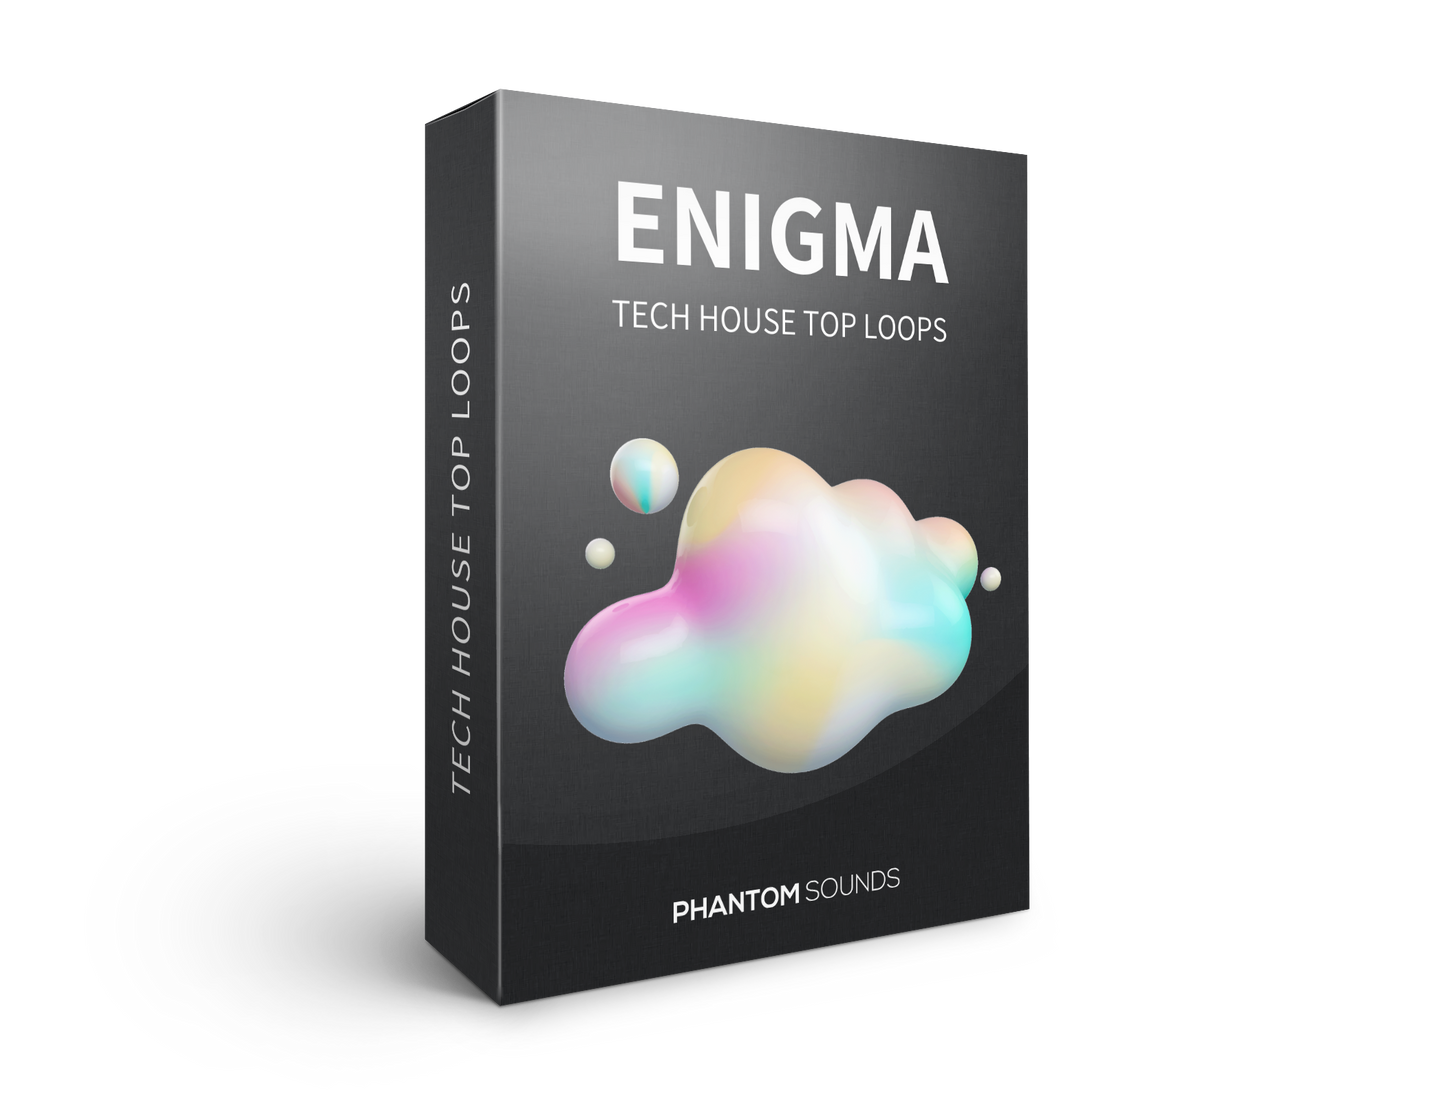 Enigma - Tech House Top Loops